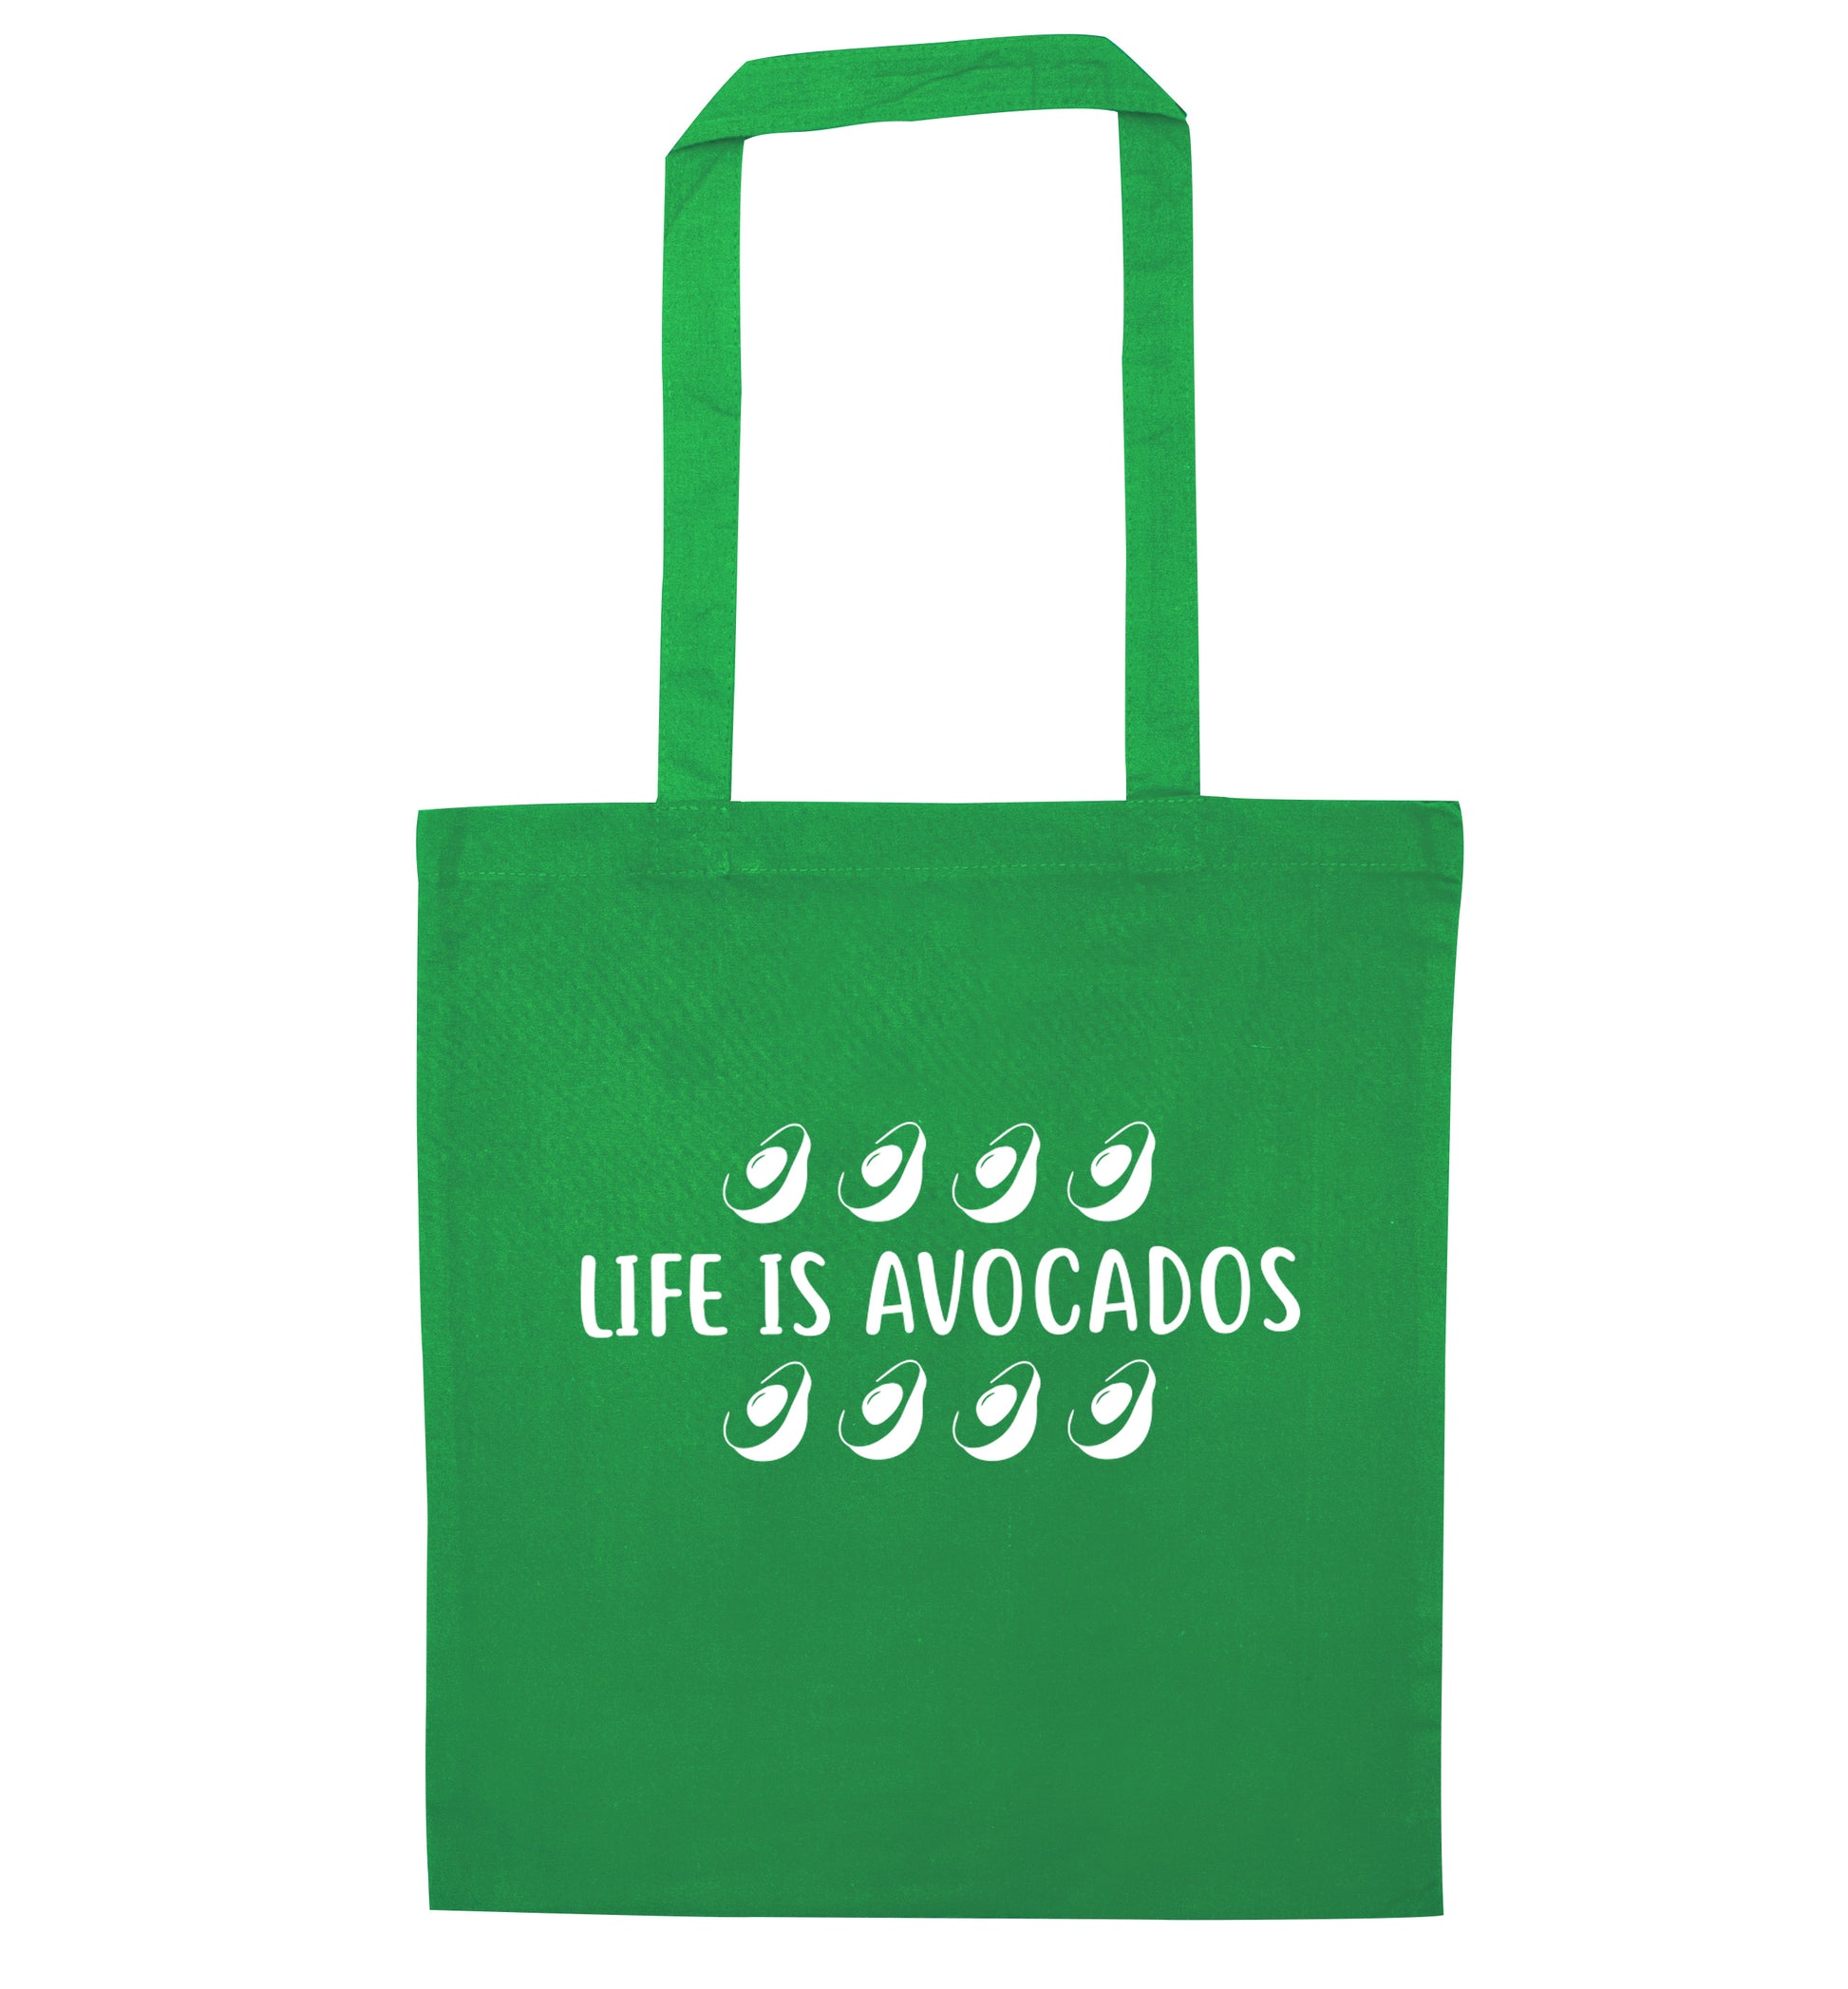 Life is avocados green tote bag